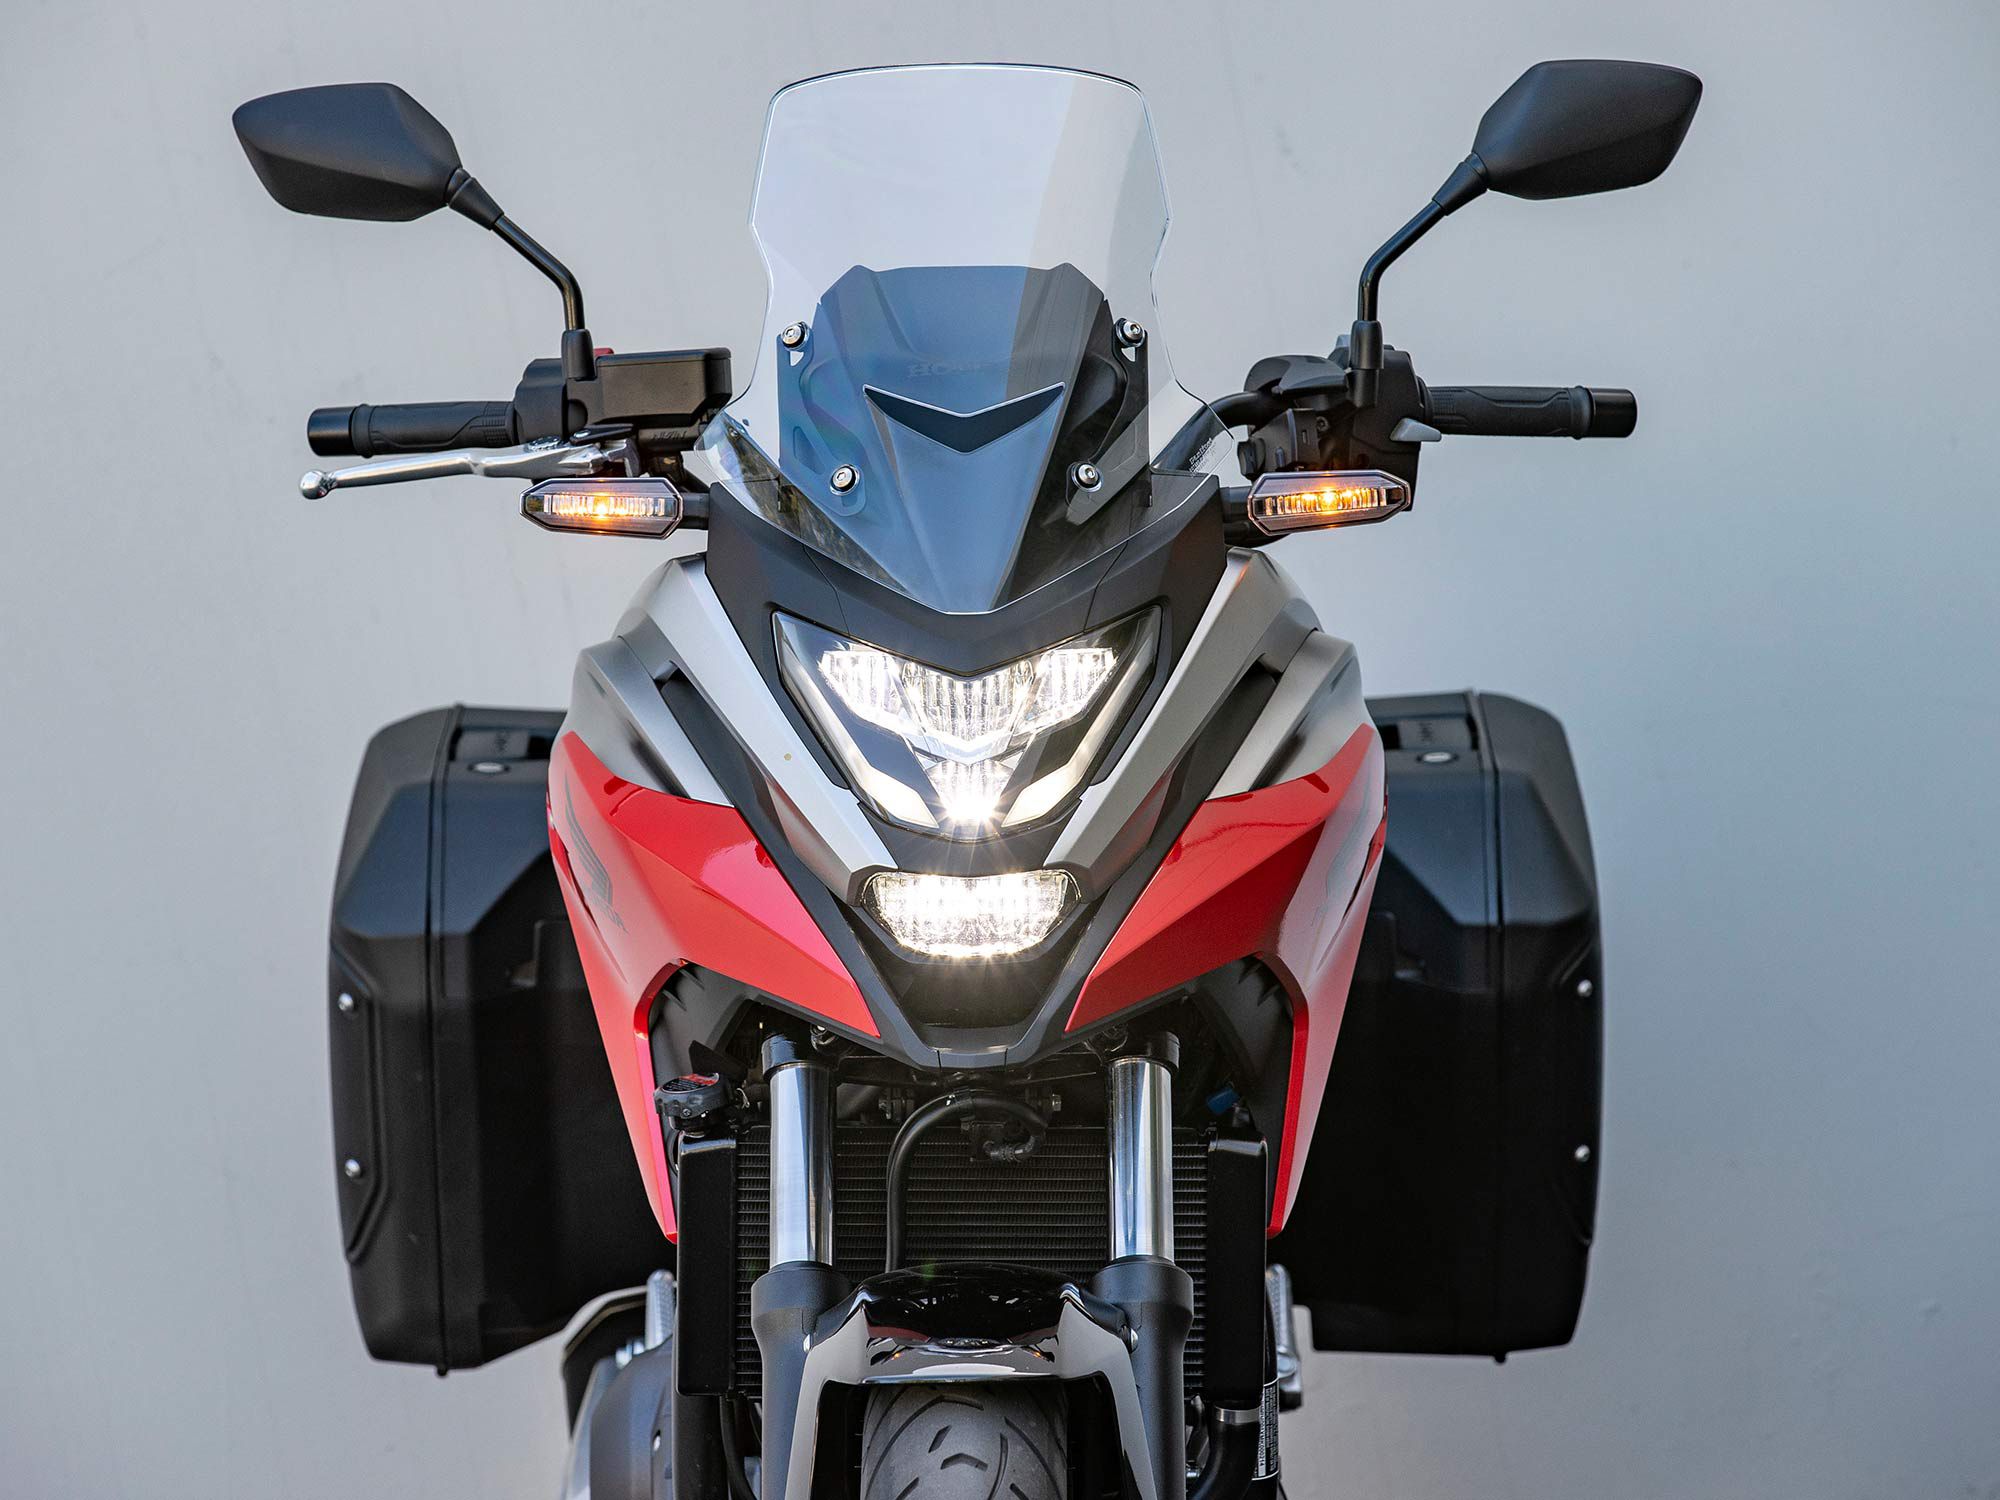 Sleek fairings add a sporty appearance to the NC750X, but the low-height windscreen slacks at providing adequate protection against turbulent air.